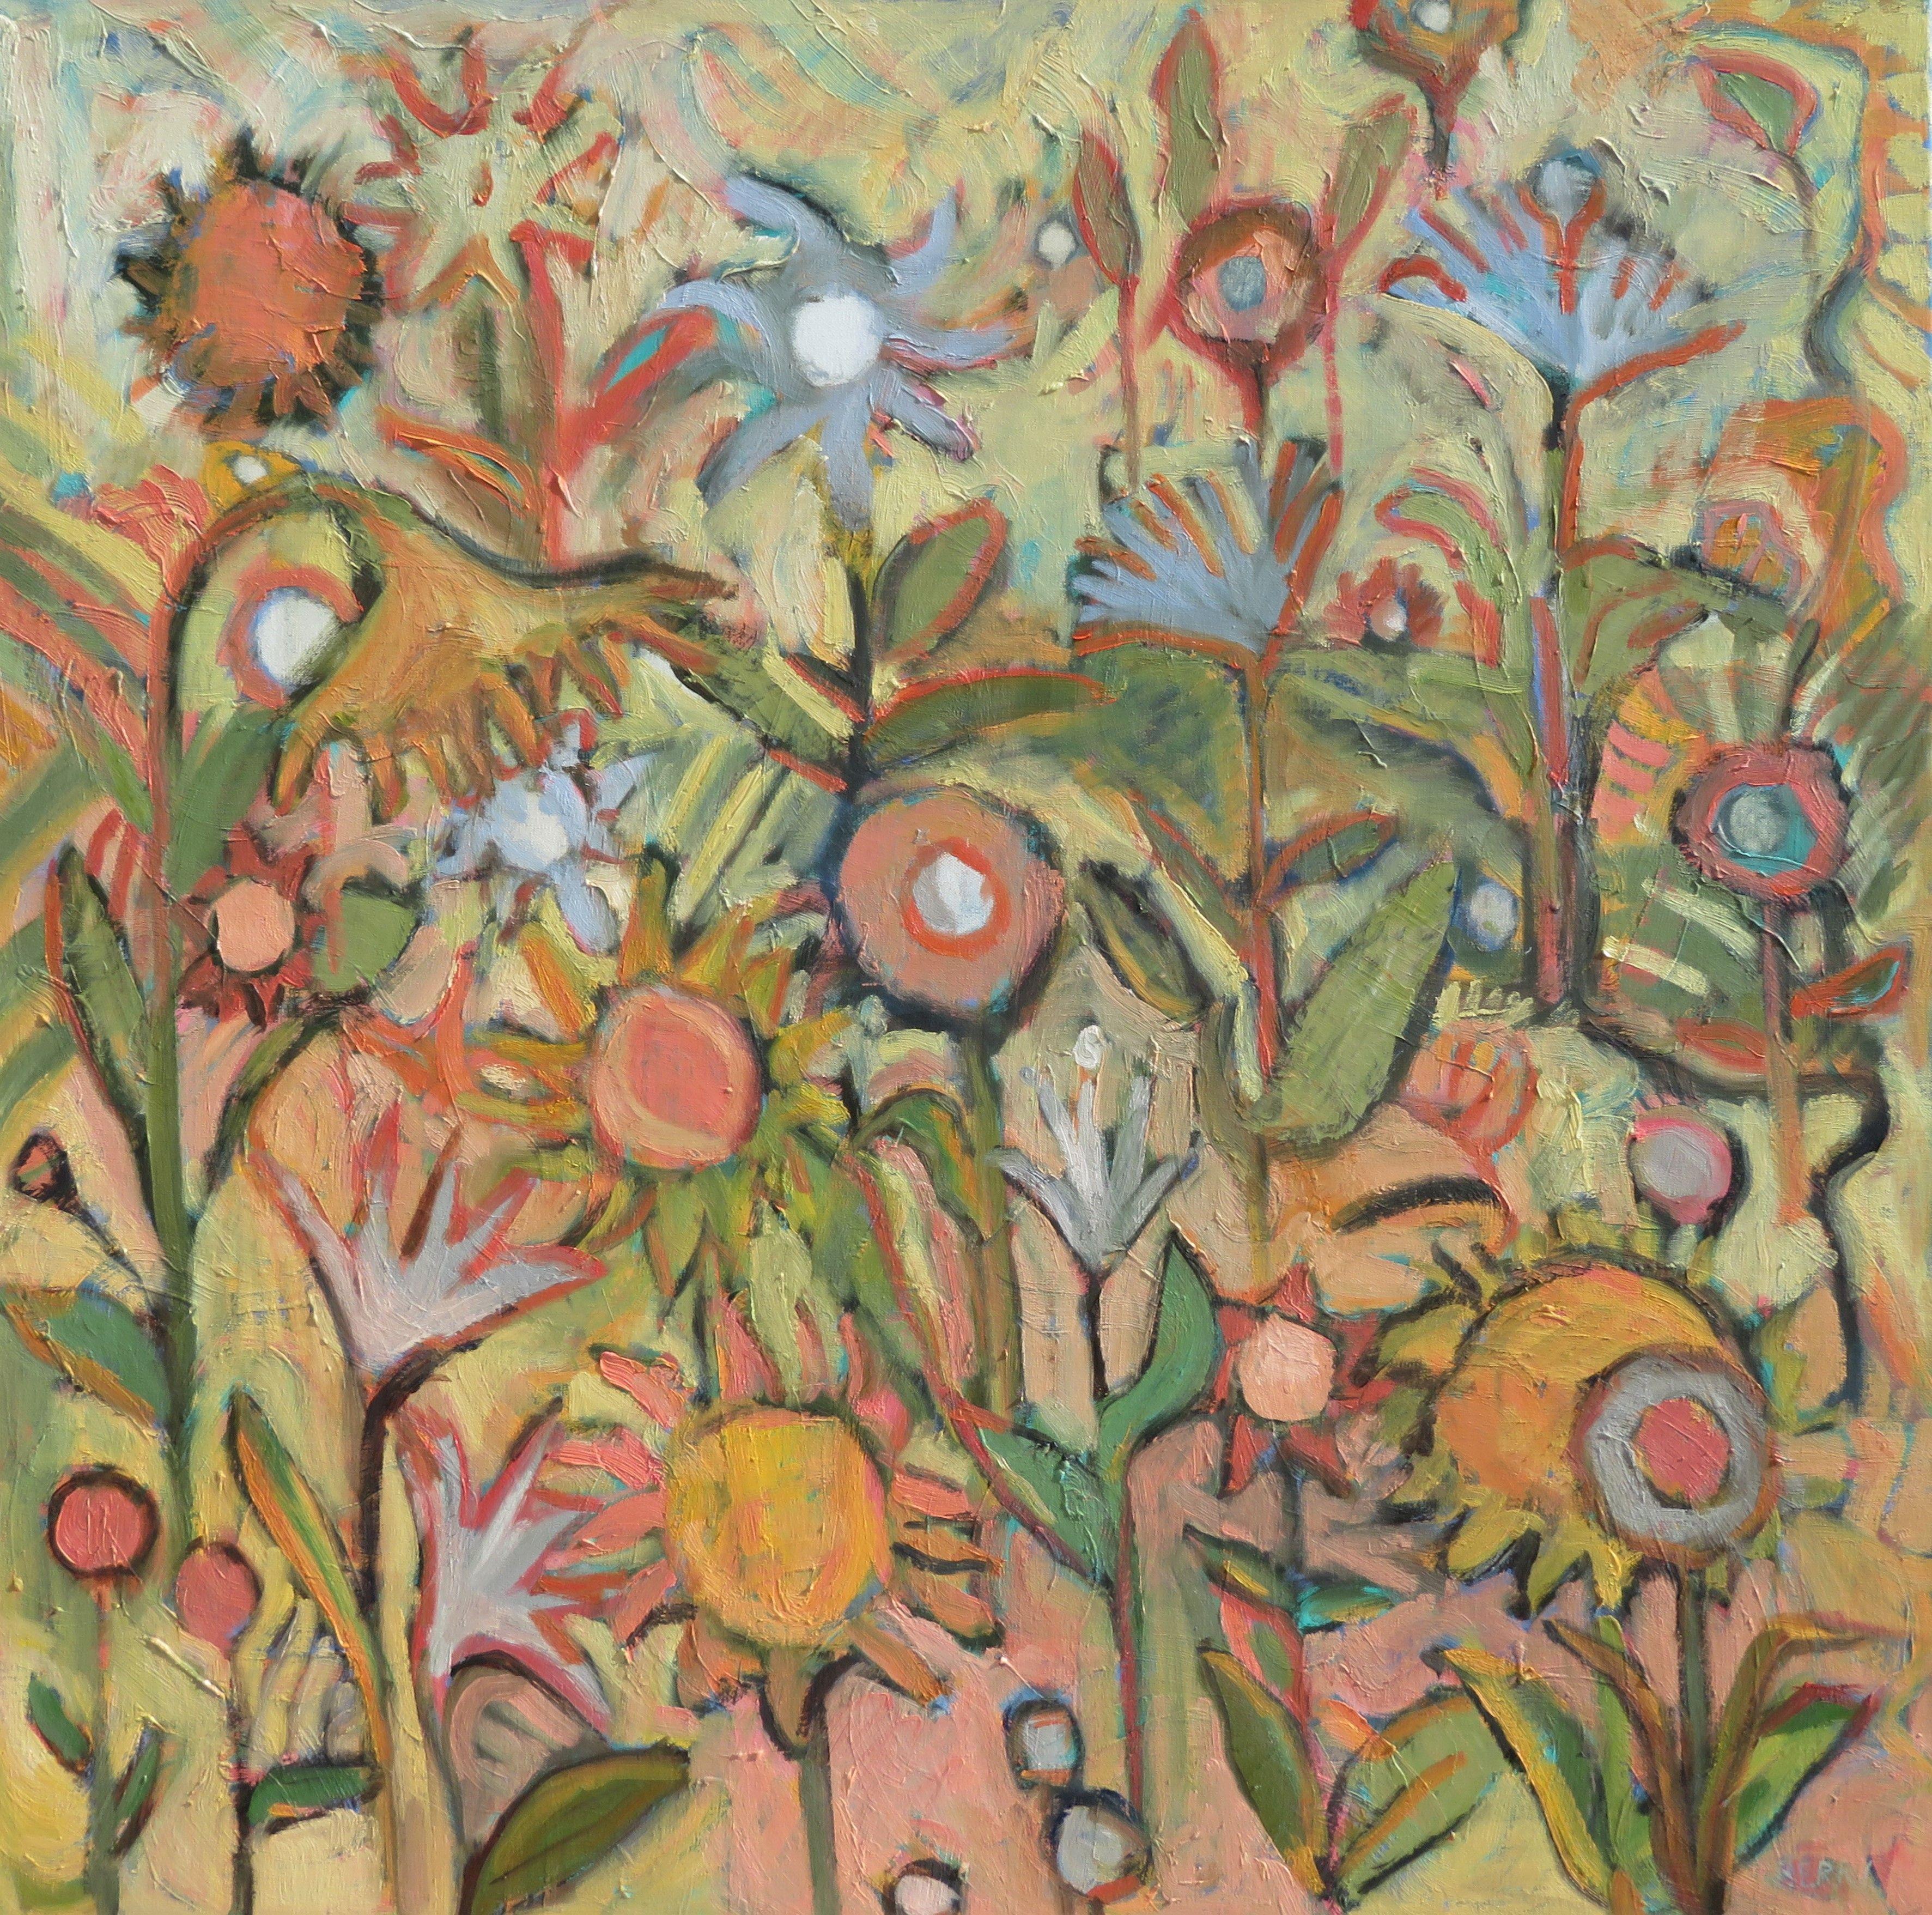 This mass of fun flowers was painted with quality oil paints and cold wax on stretched linen.  The edges are painted and it is ready to hang. :: Painting :: Contemporary :: This piece comes with an official certificate of authenticity signed by the